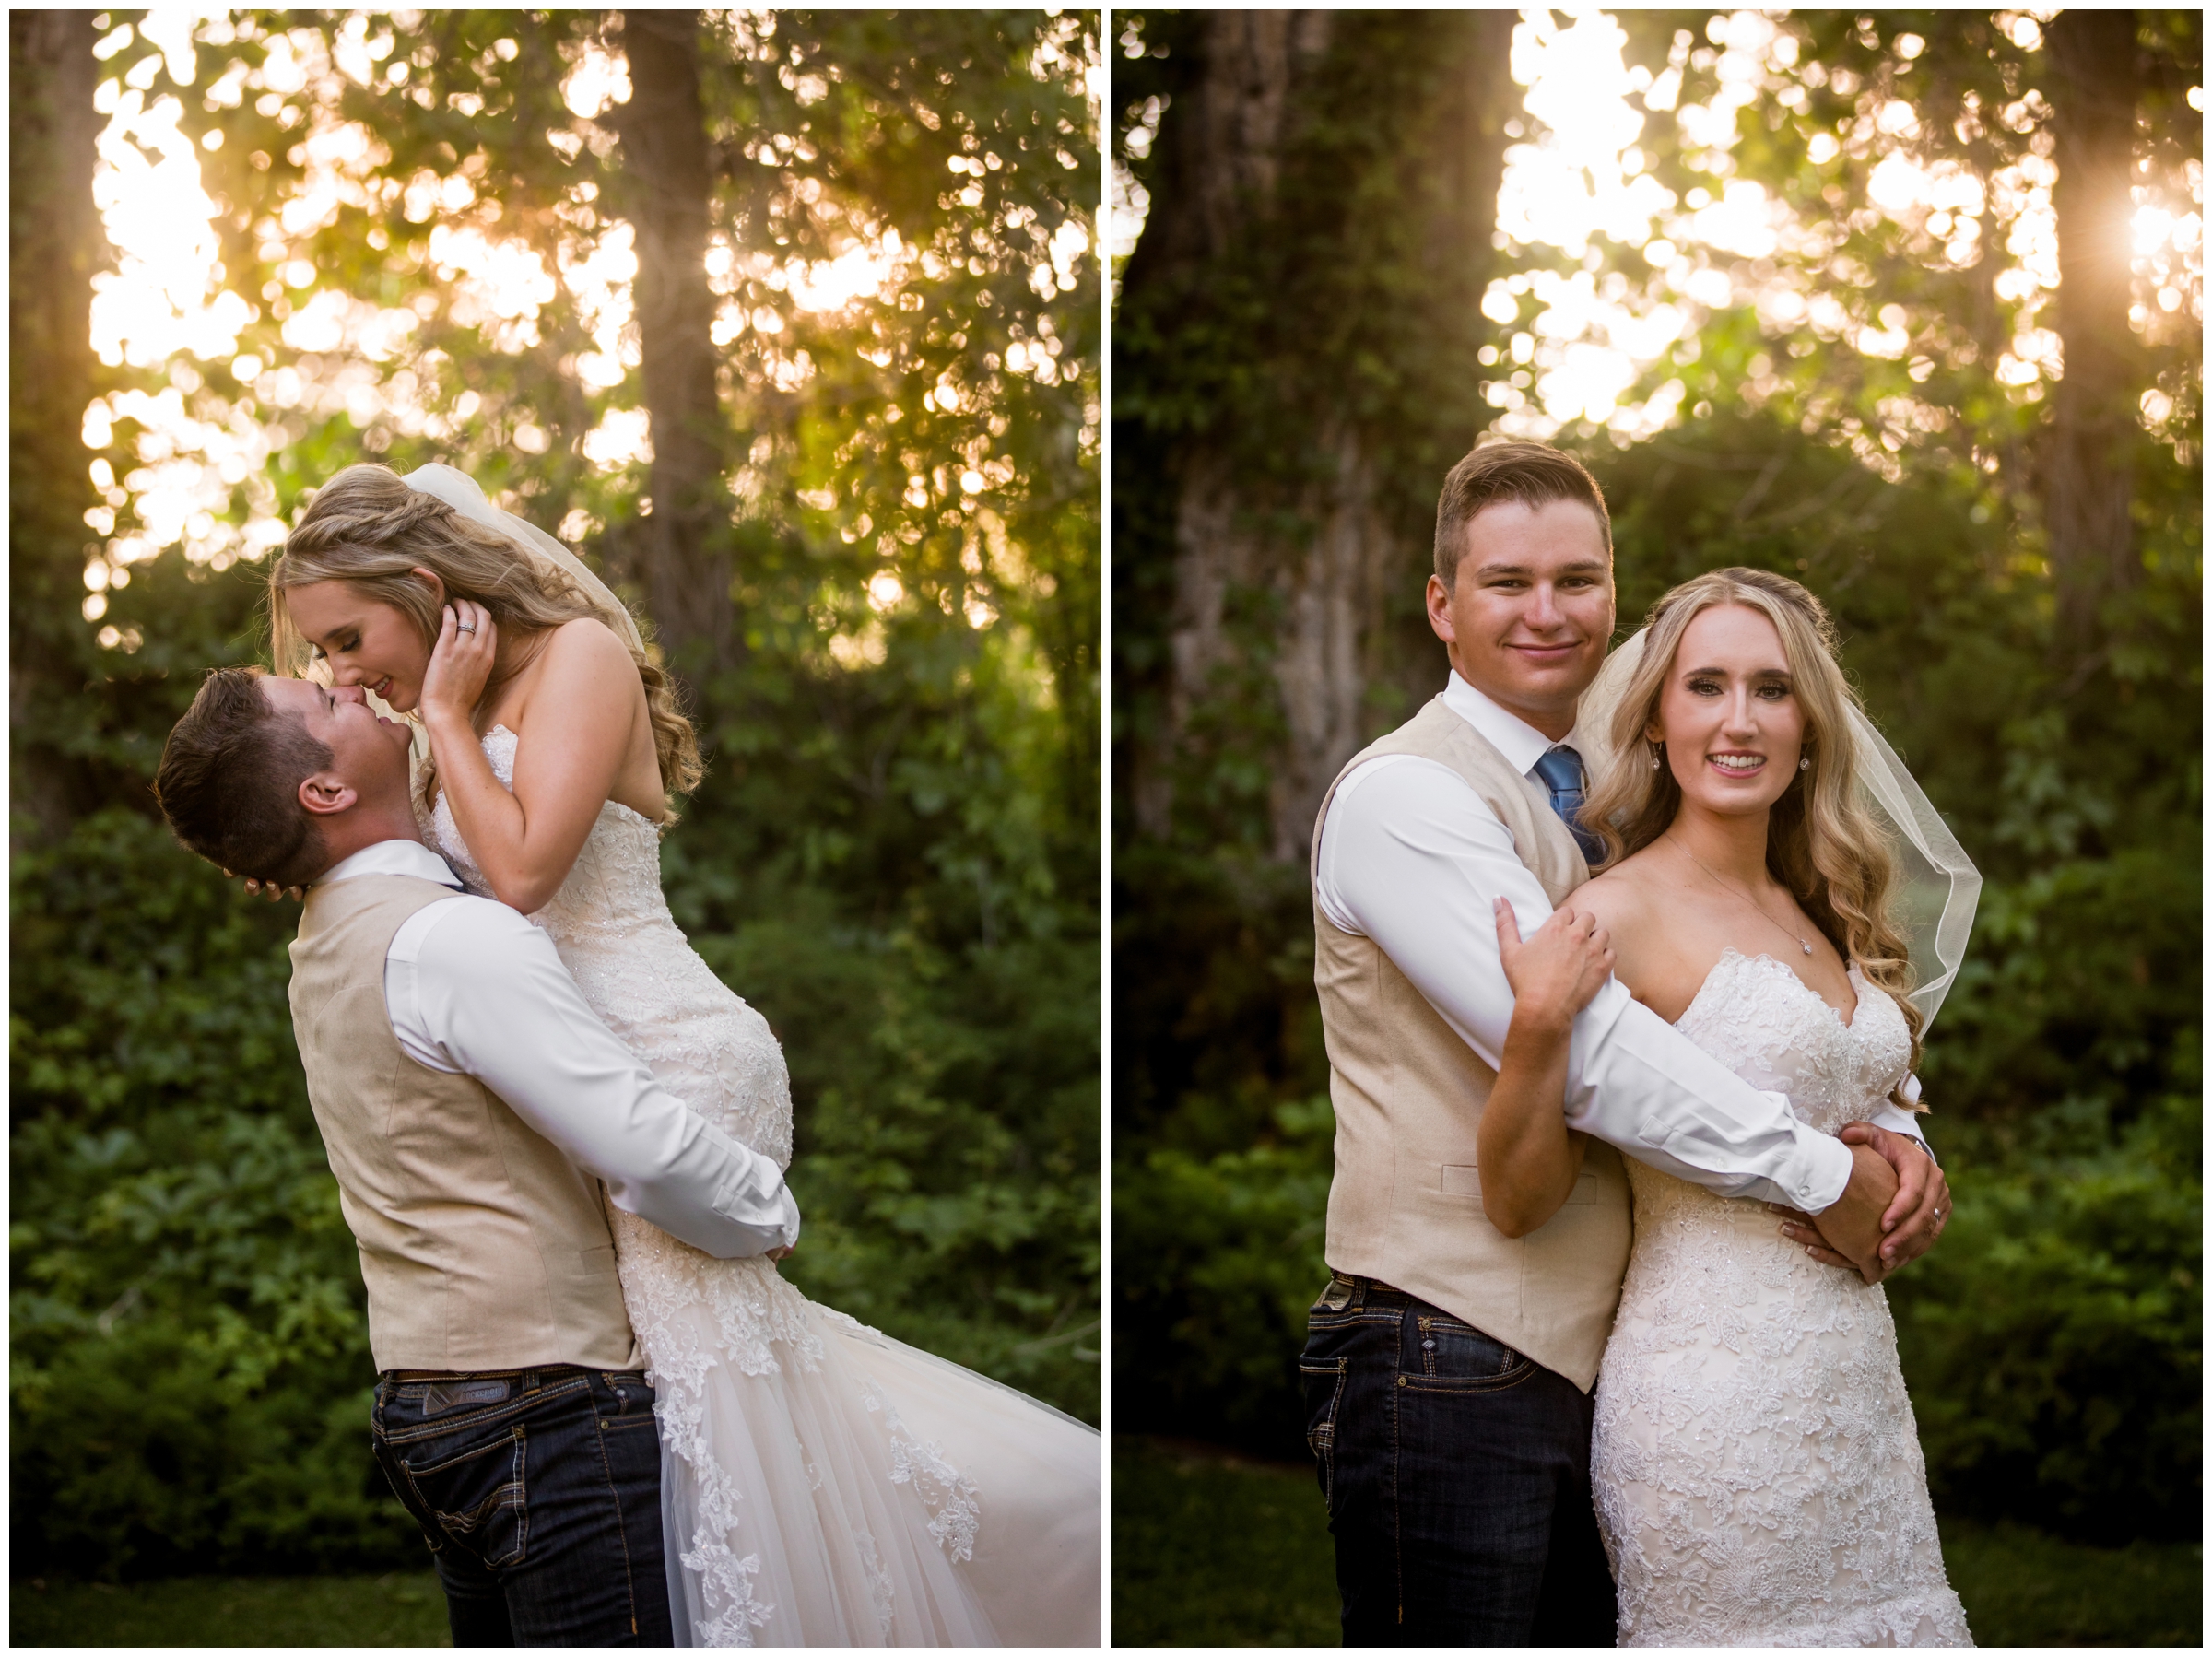 Tapestry House wedding photos by Fort Collins Colorado photographer Plum Pretty Photography